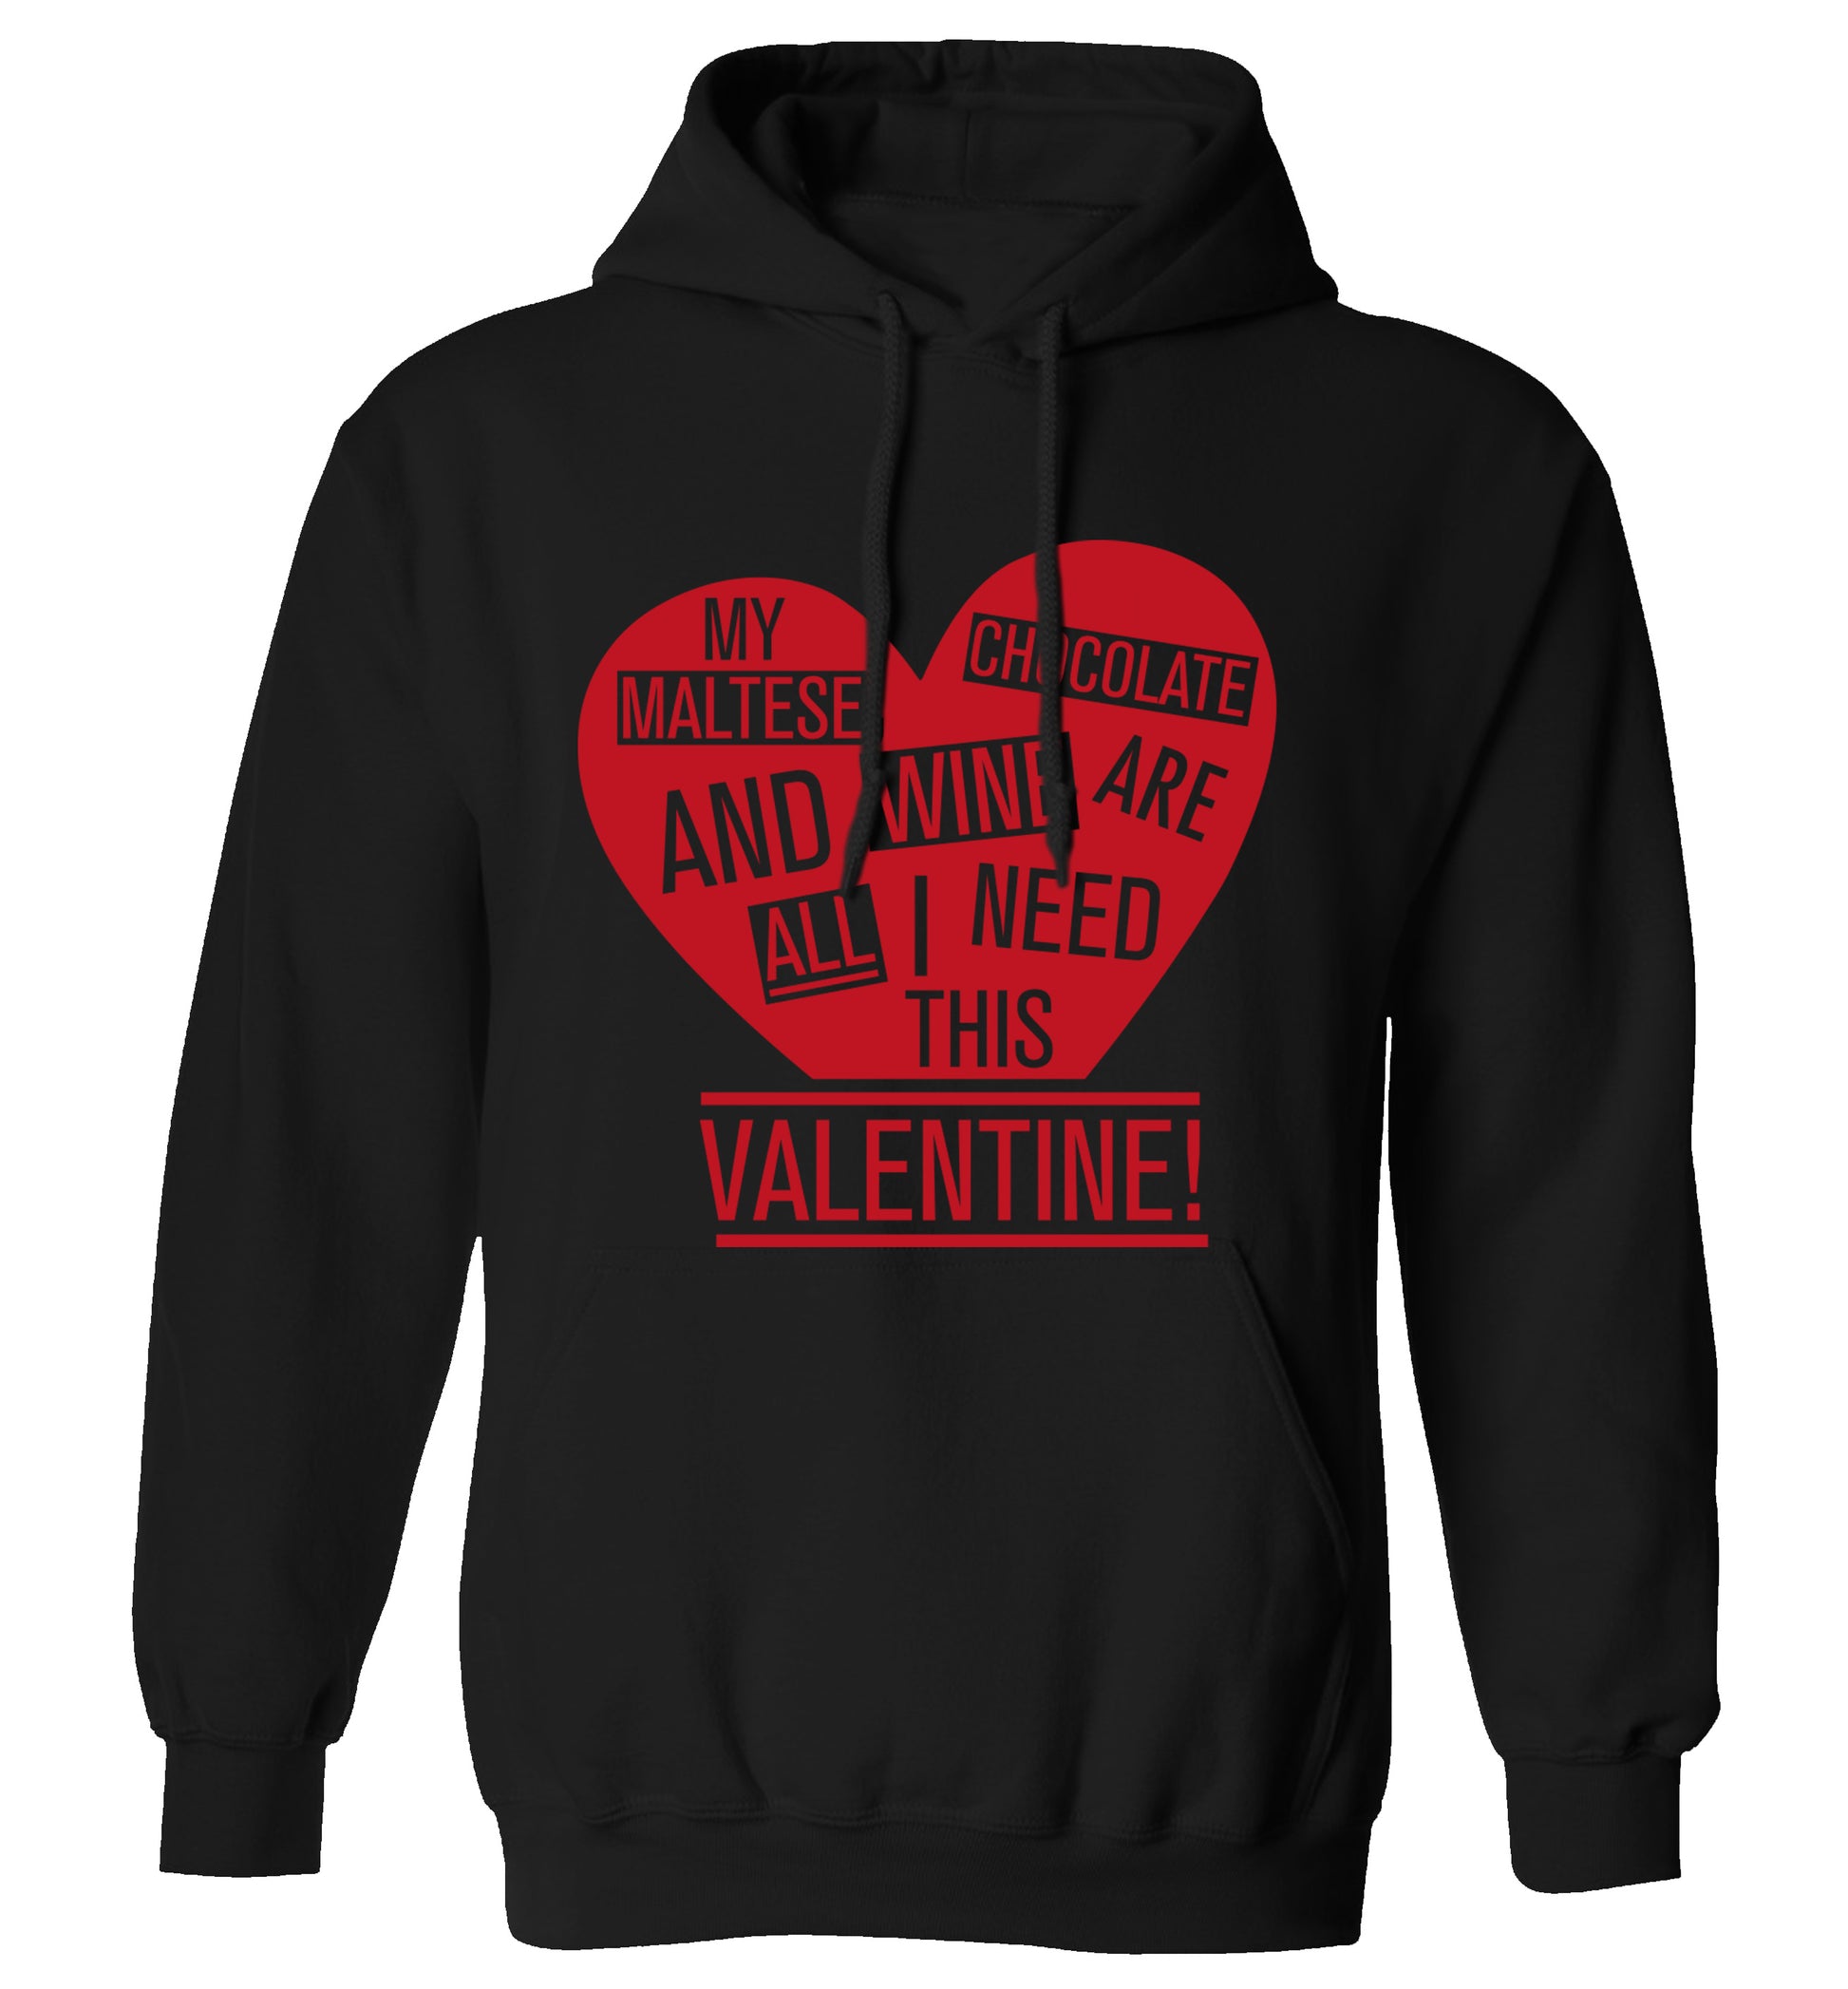 My maltese, chocolate and wine are all I need this valentine! adults unisex black hoodie 2XL